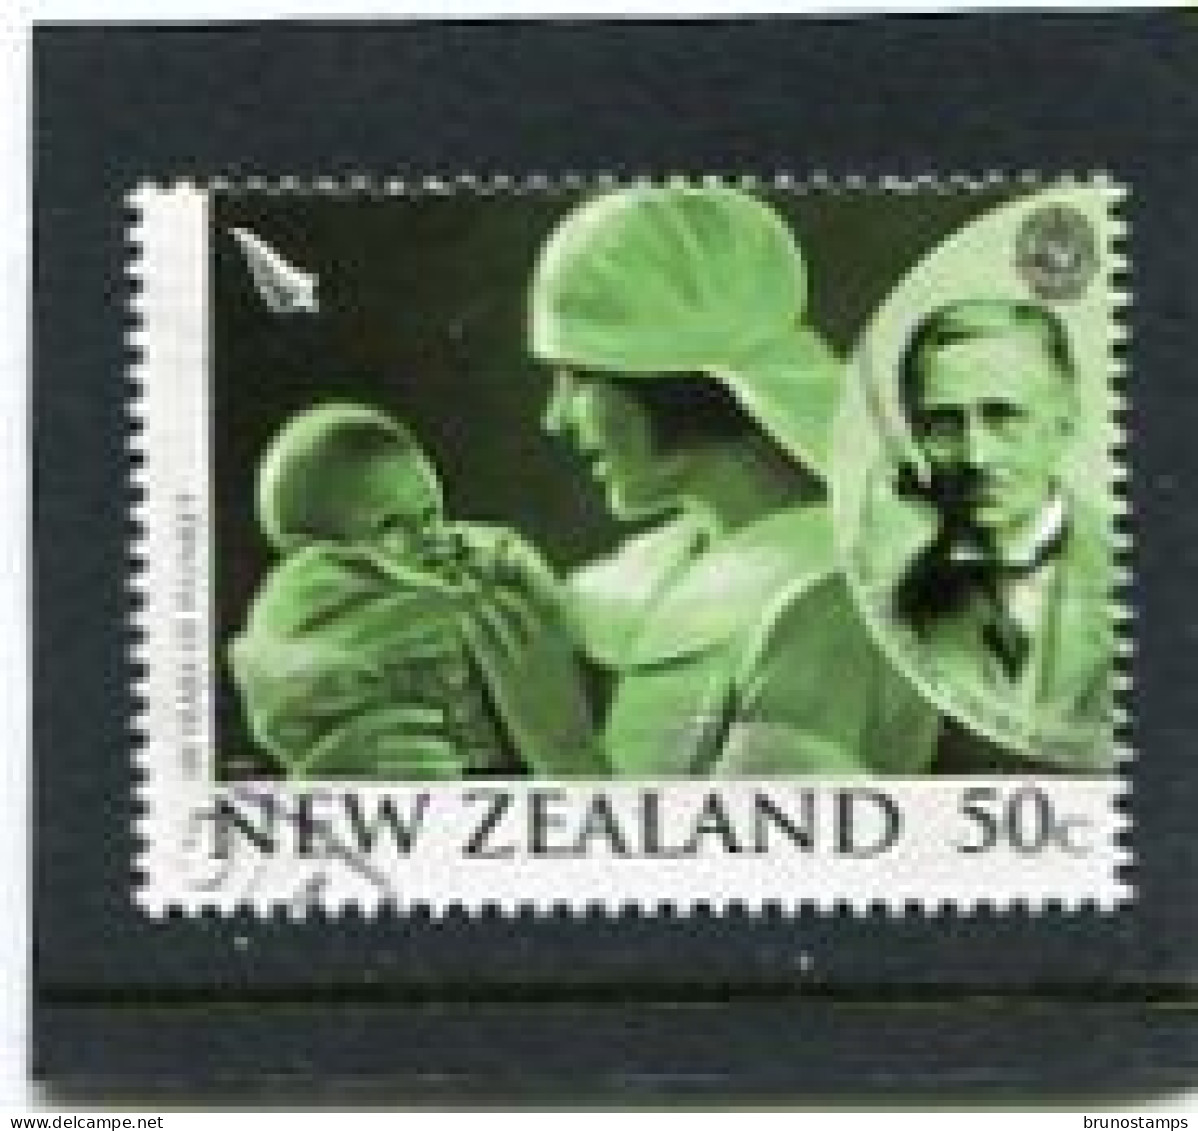 NEW ZEALAND - 2007  50c  RUGBY F.TRUBY KING  FINE  USED - Used Stamps